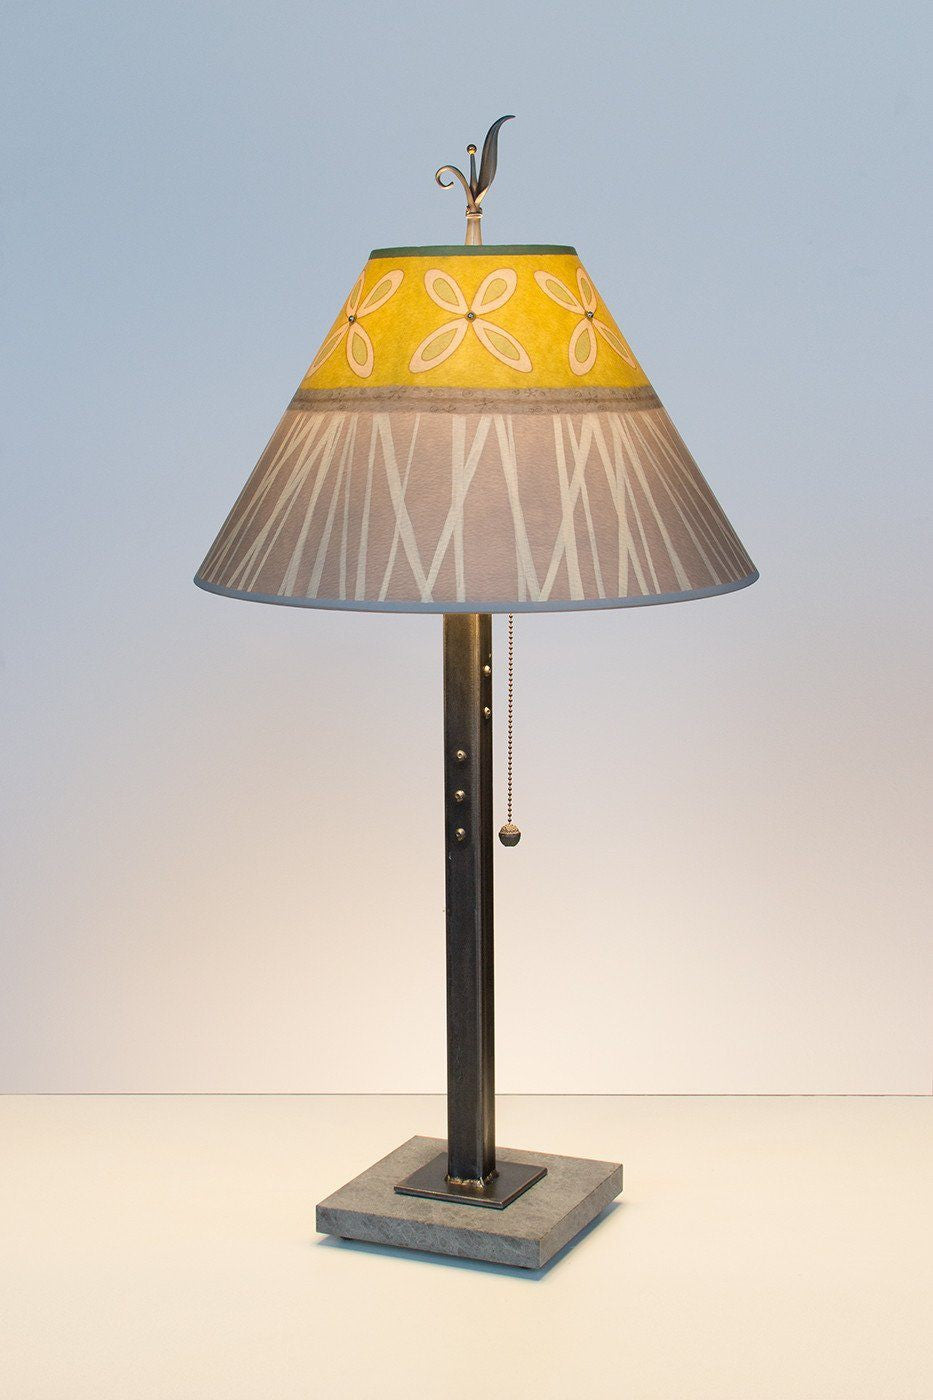 Steel Table Lamp on Marble with Medium Conical Shade in Kiwi - Lit